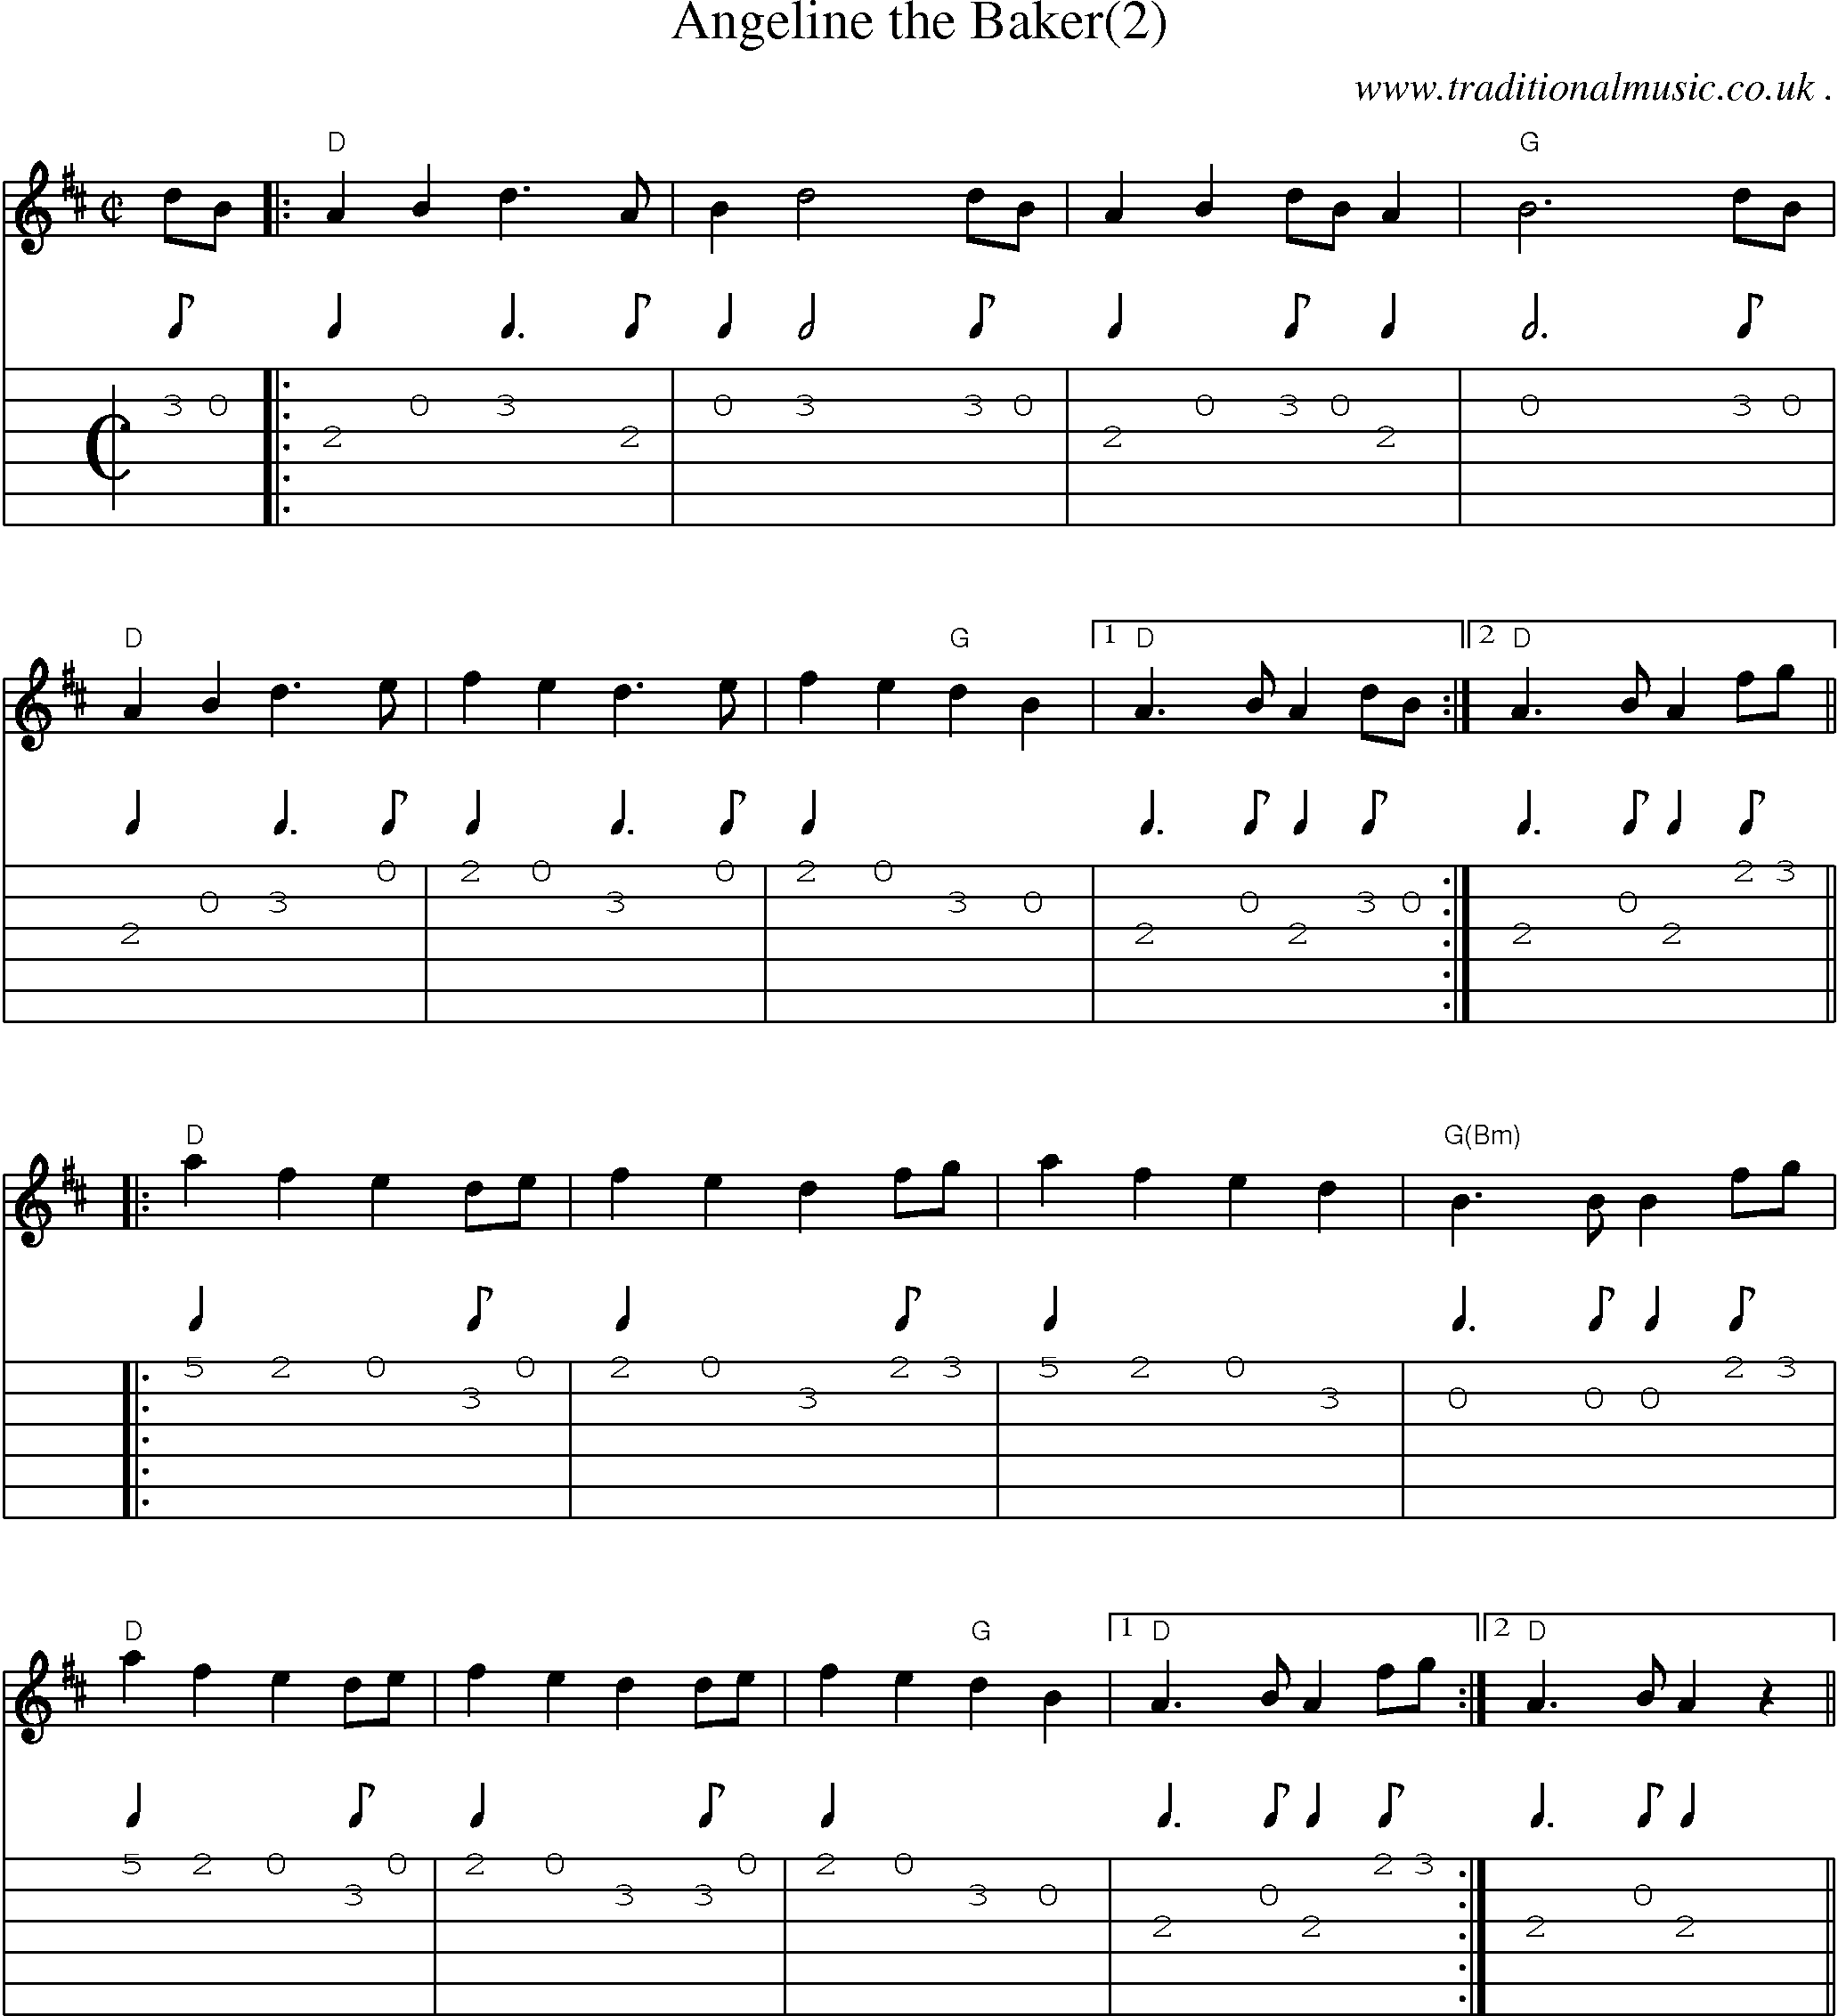 Music Score and Guitar Tabs for Angeline The Baker(2)